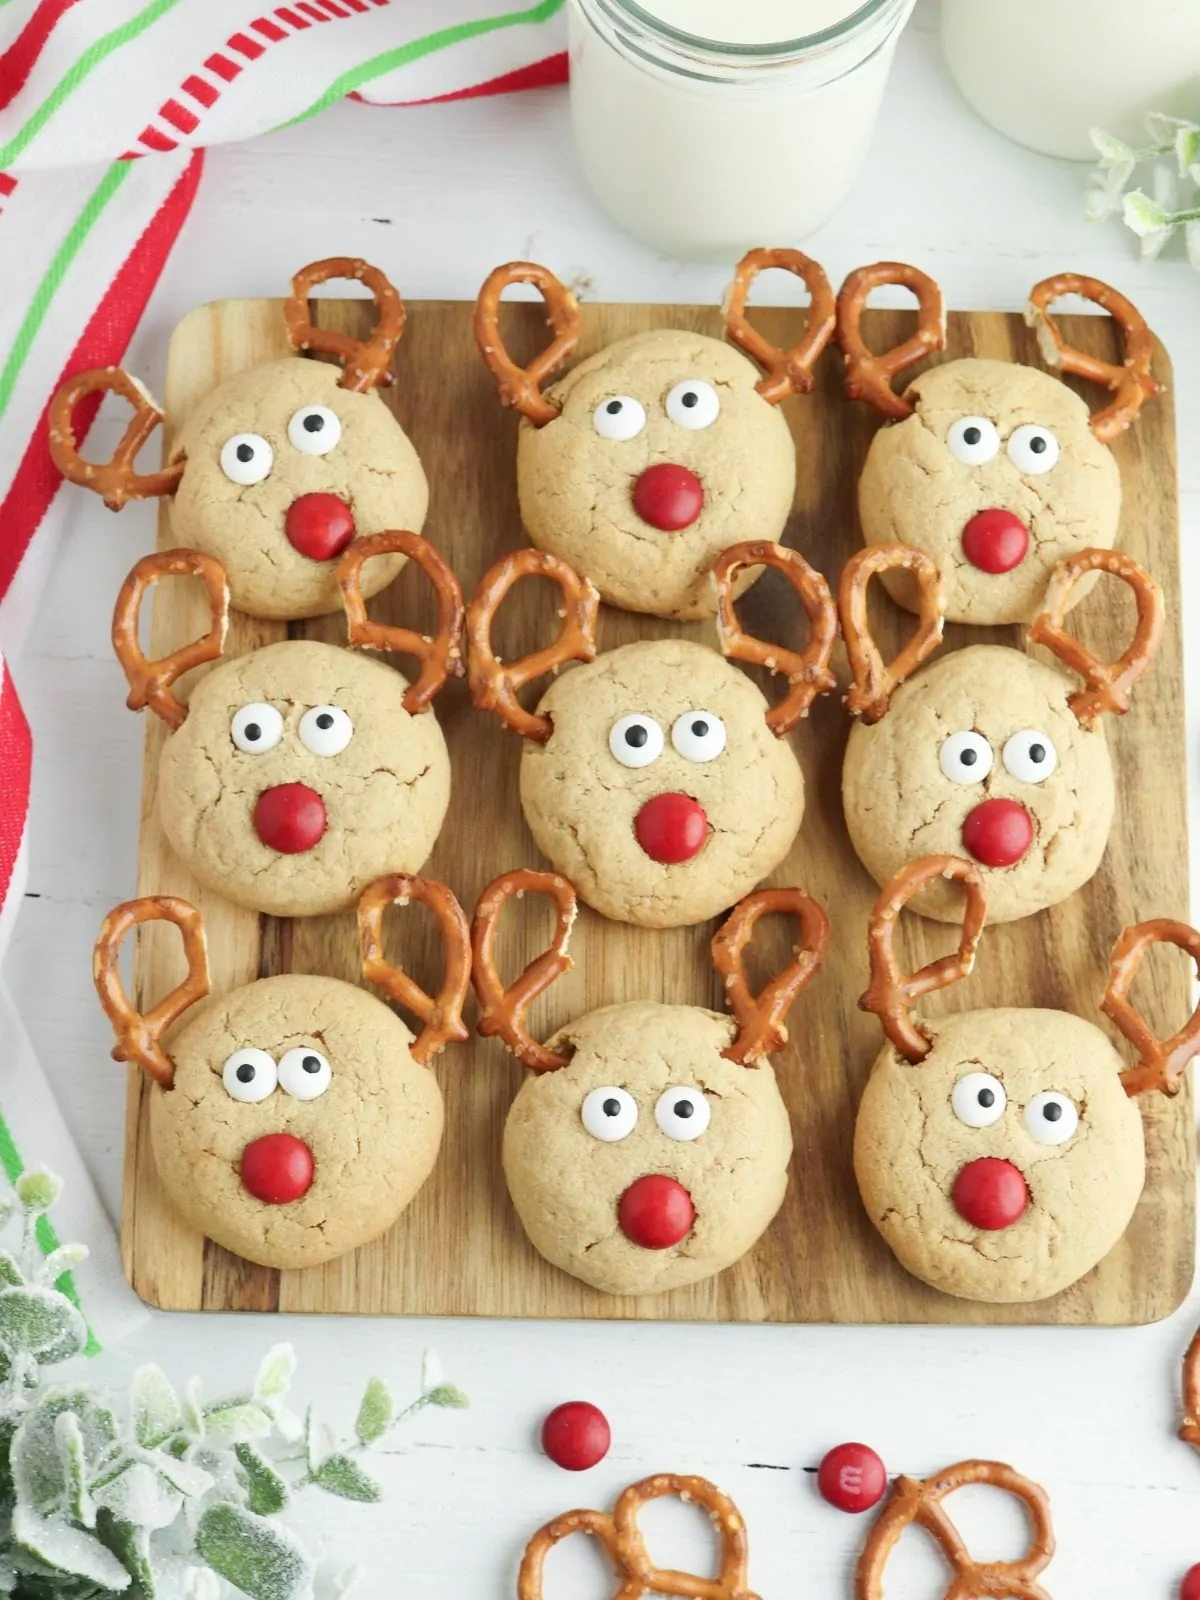 reindeer cookies with pretzel antlers and candy eyes.